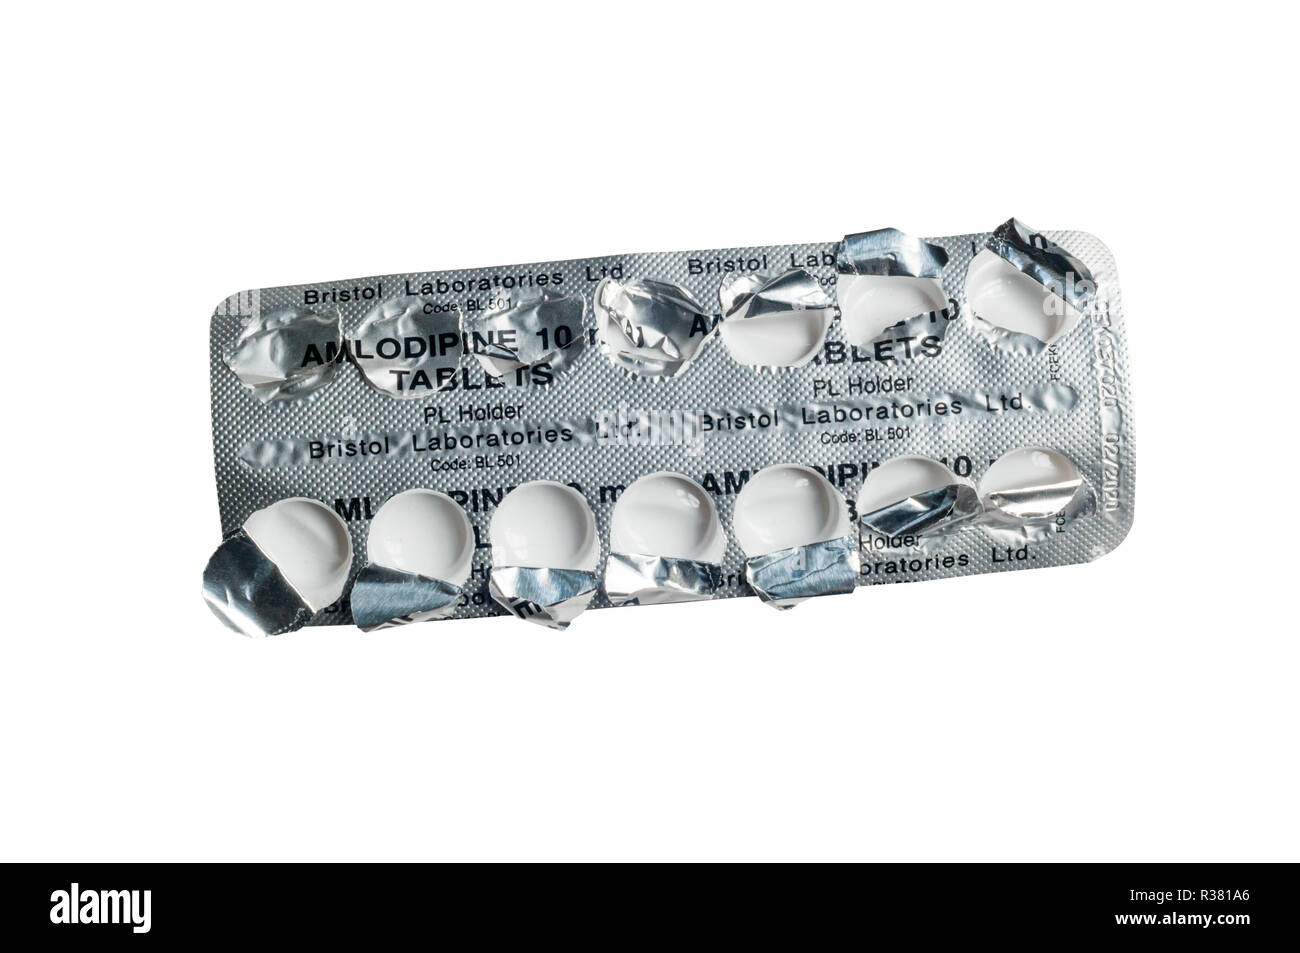 An empty used 14-day blister pack packet of Amlodipine tablets used to control high blood pressure or hypertension. Stock Photo